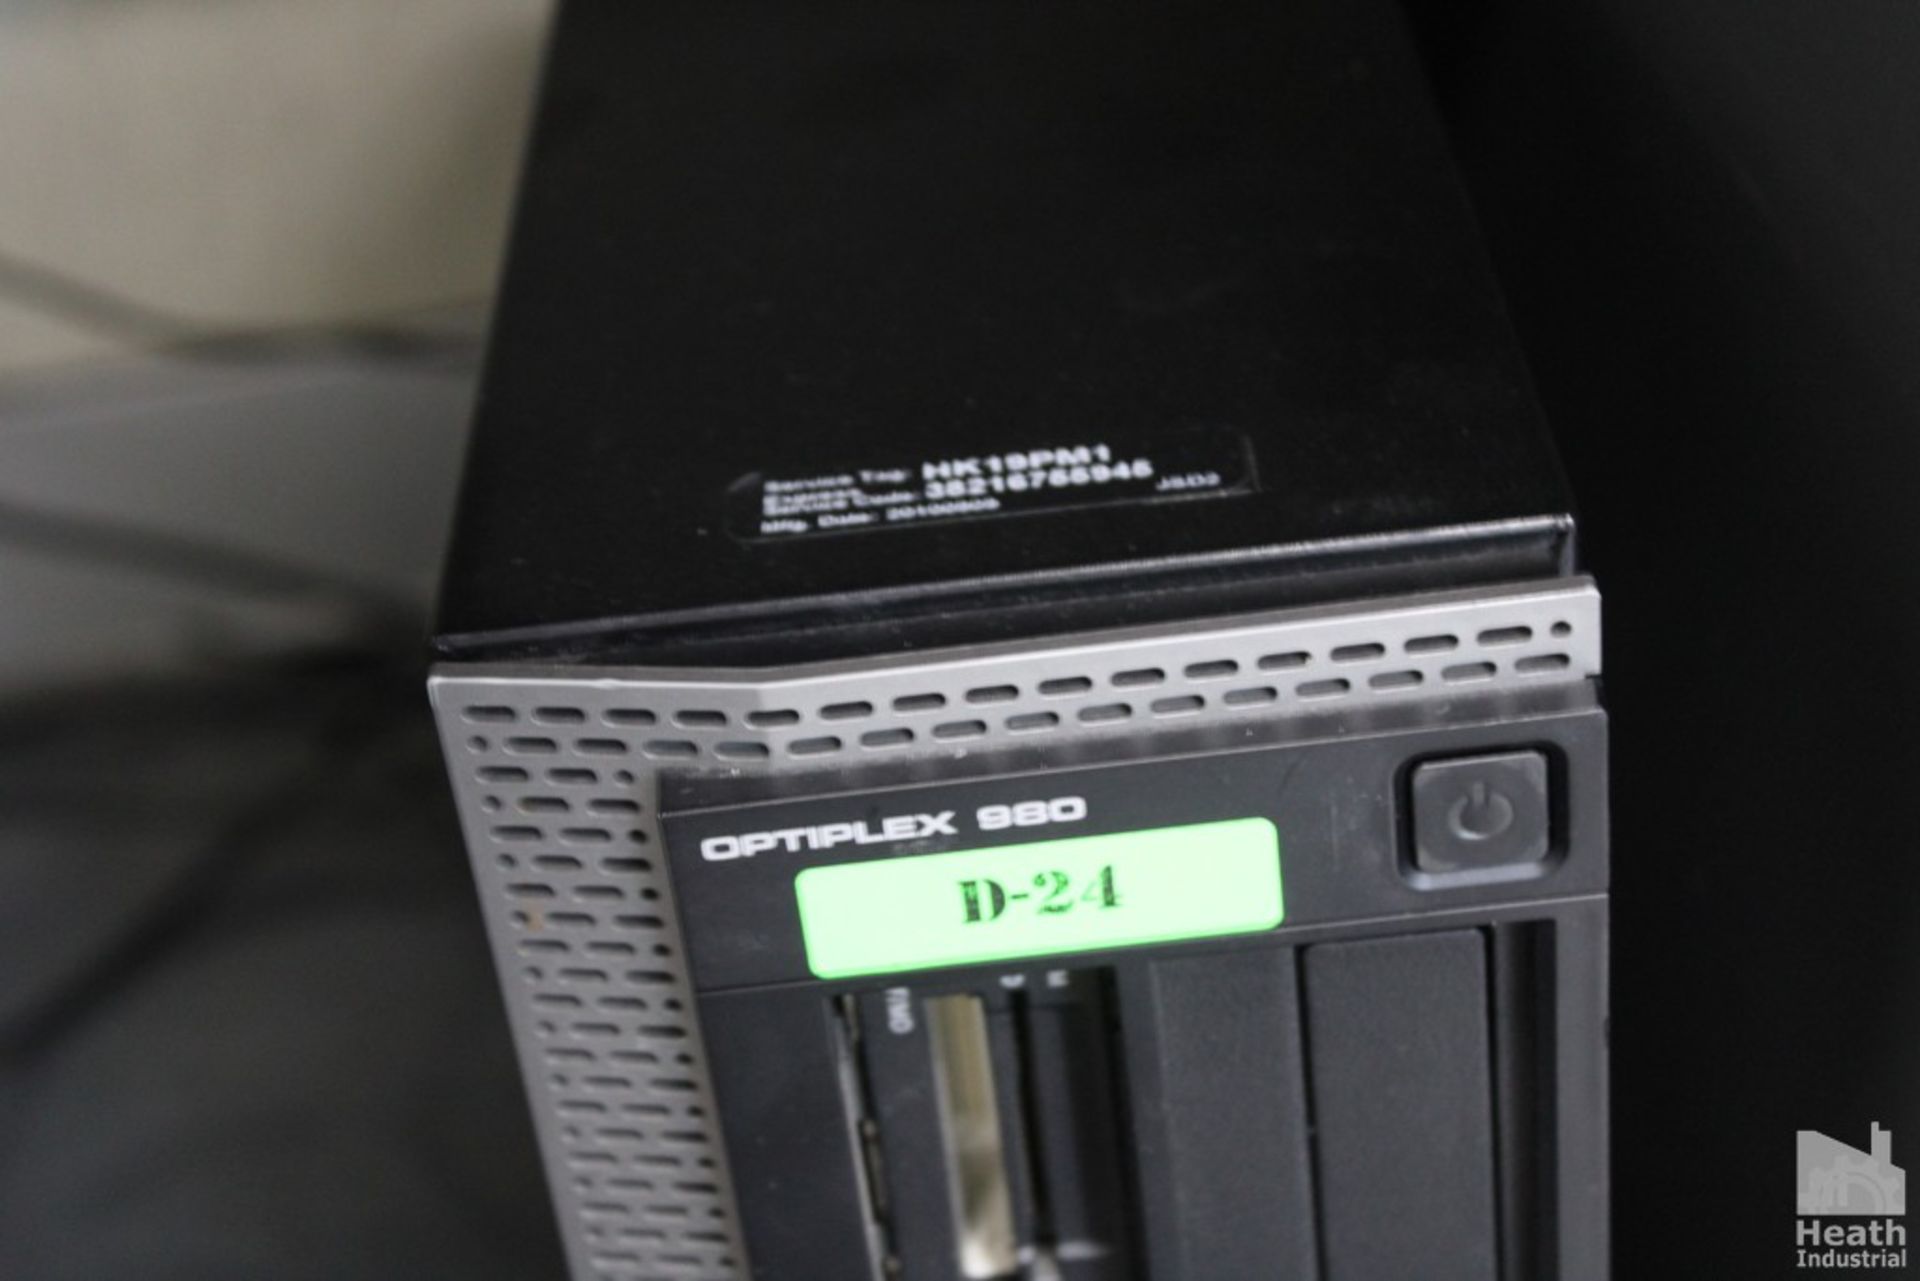 DELL OPTIPLEX 980 TOWER WITH TWO MONITORS AND KEYBOARD - Image 3 of 3